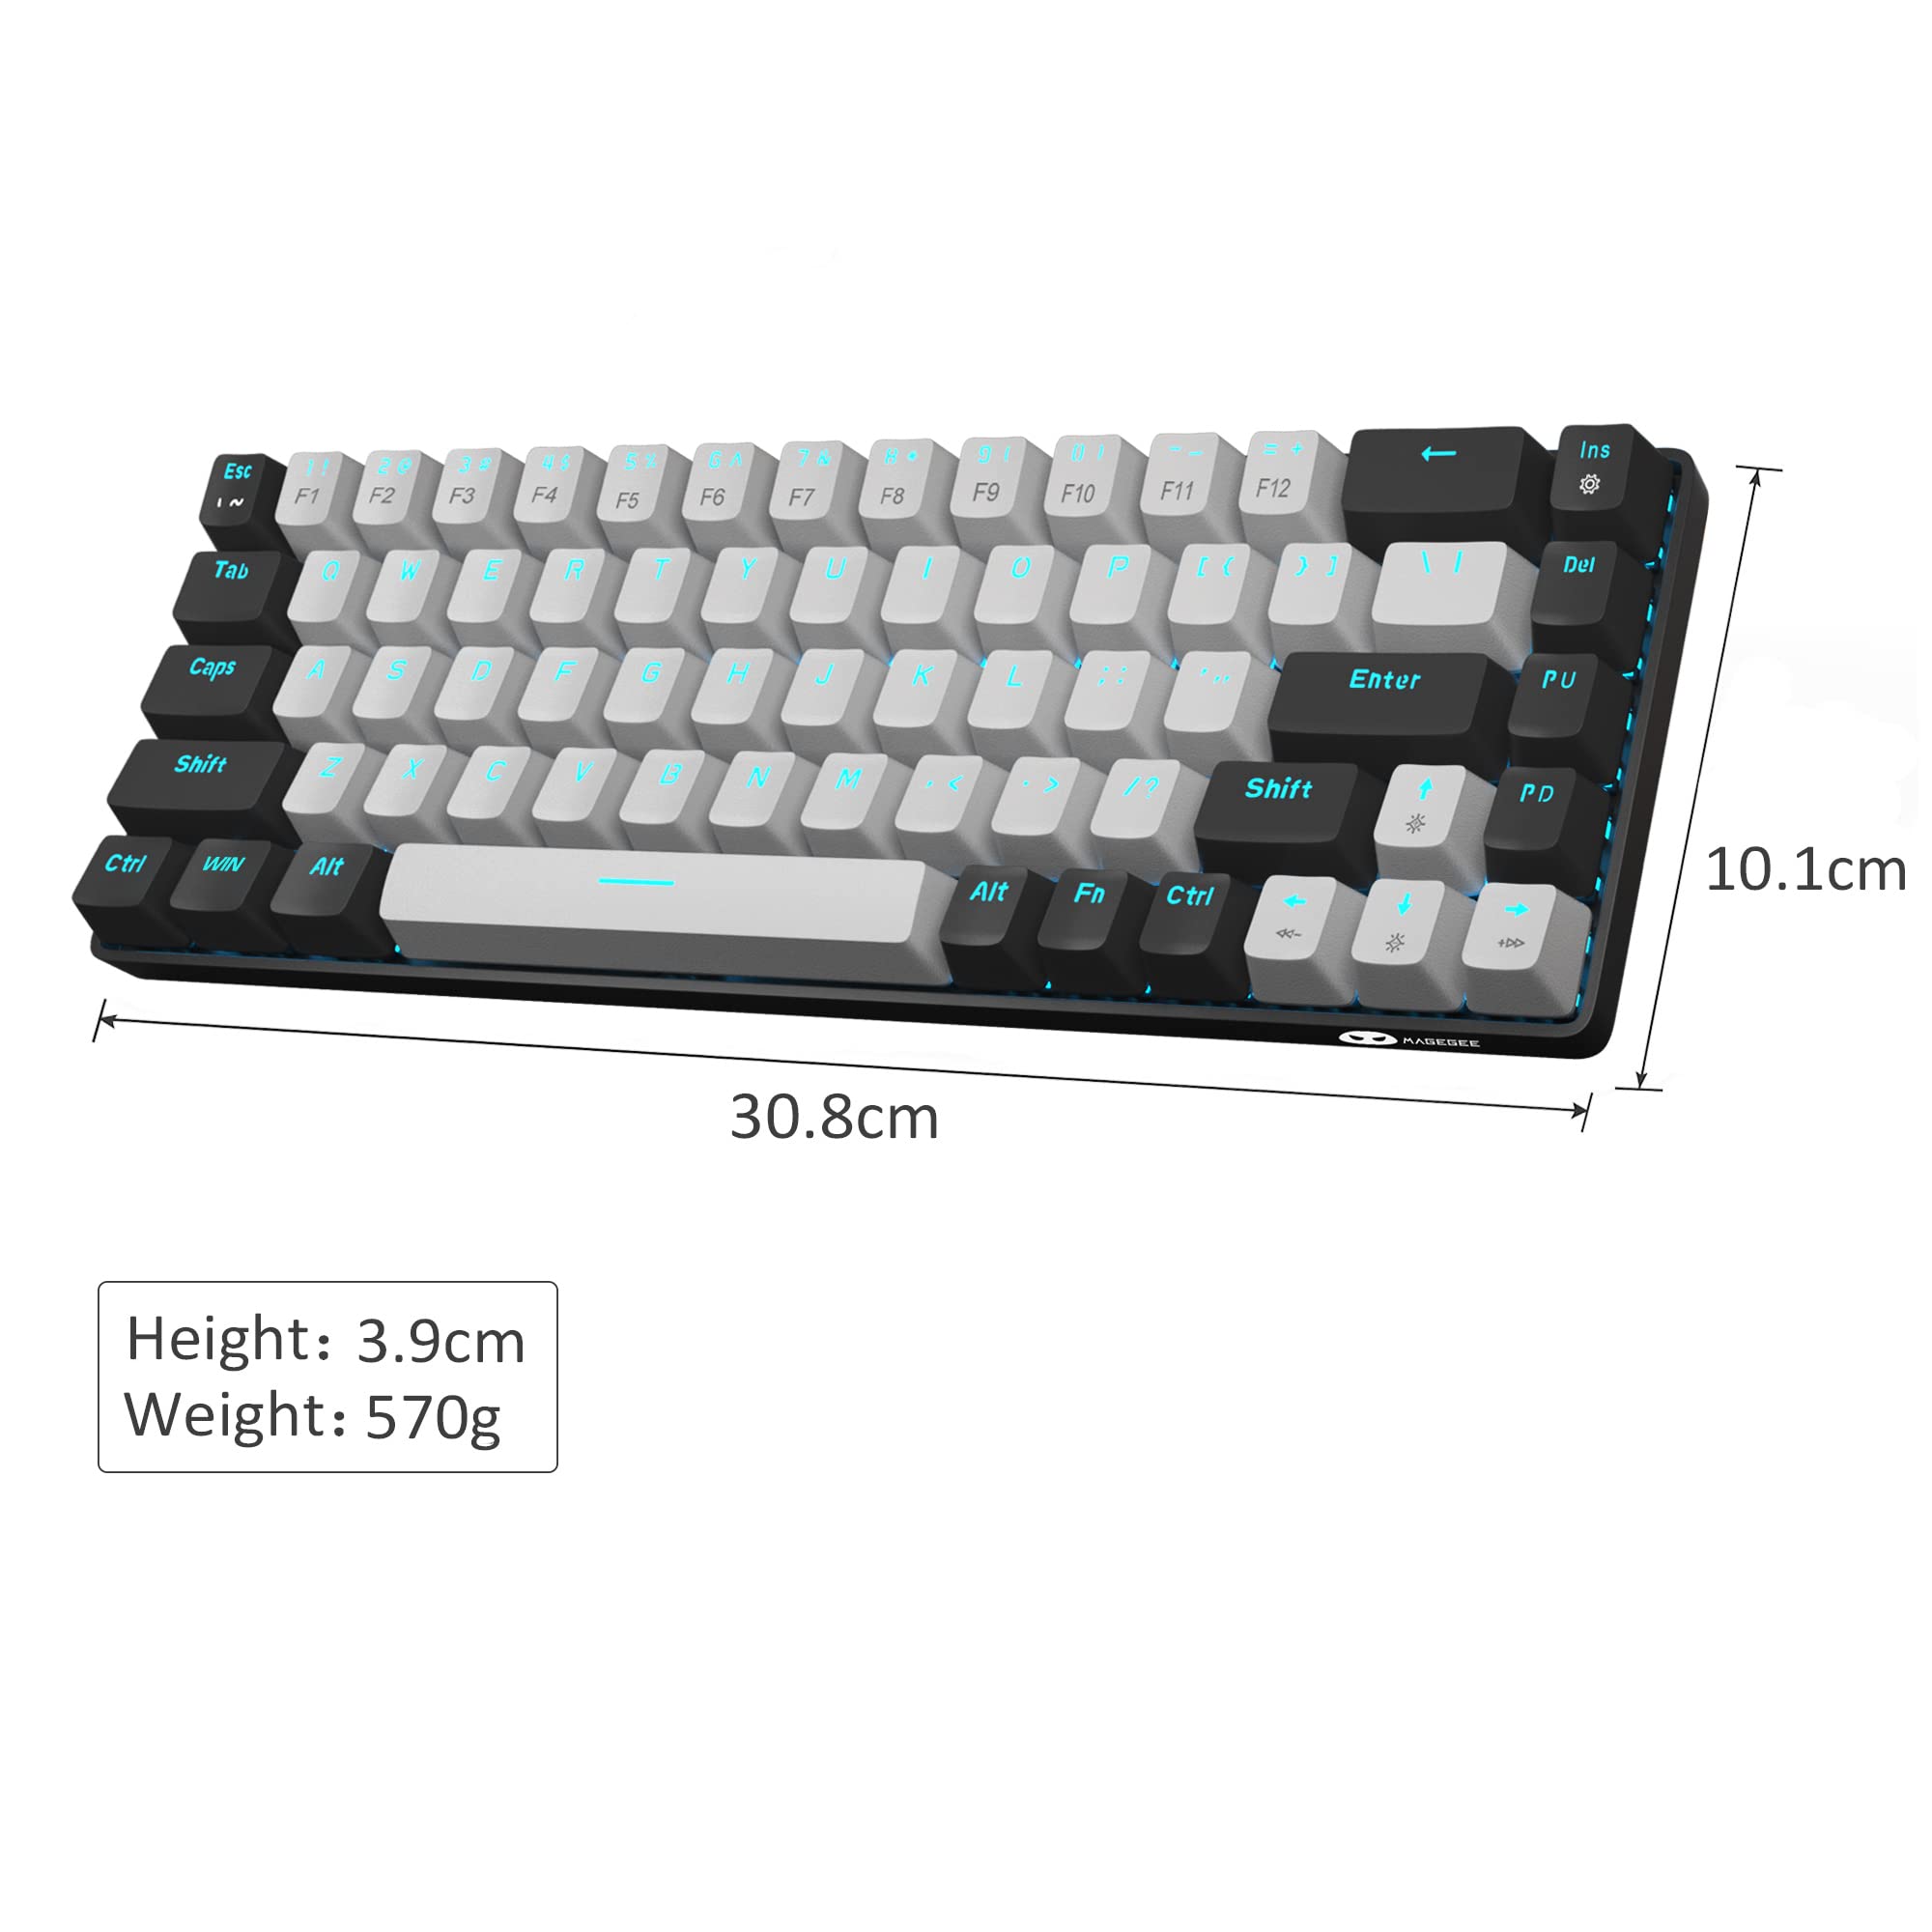 MageGee Portable 60% Mechanical Gaming Keyboard, MK-Box LED Backlit Compact 68 Keys Mini Wired Office Keyboard with Blue Switch for Windows Laptop PC Mac - Grey/Black $29.99